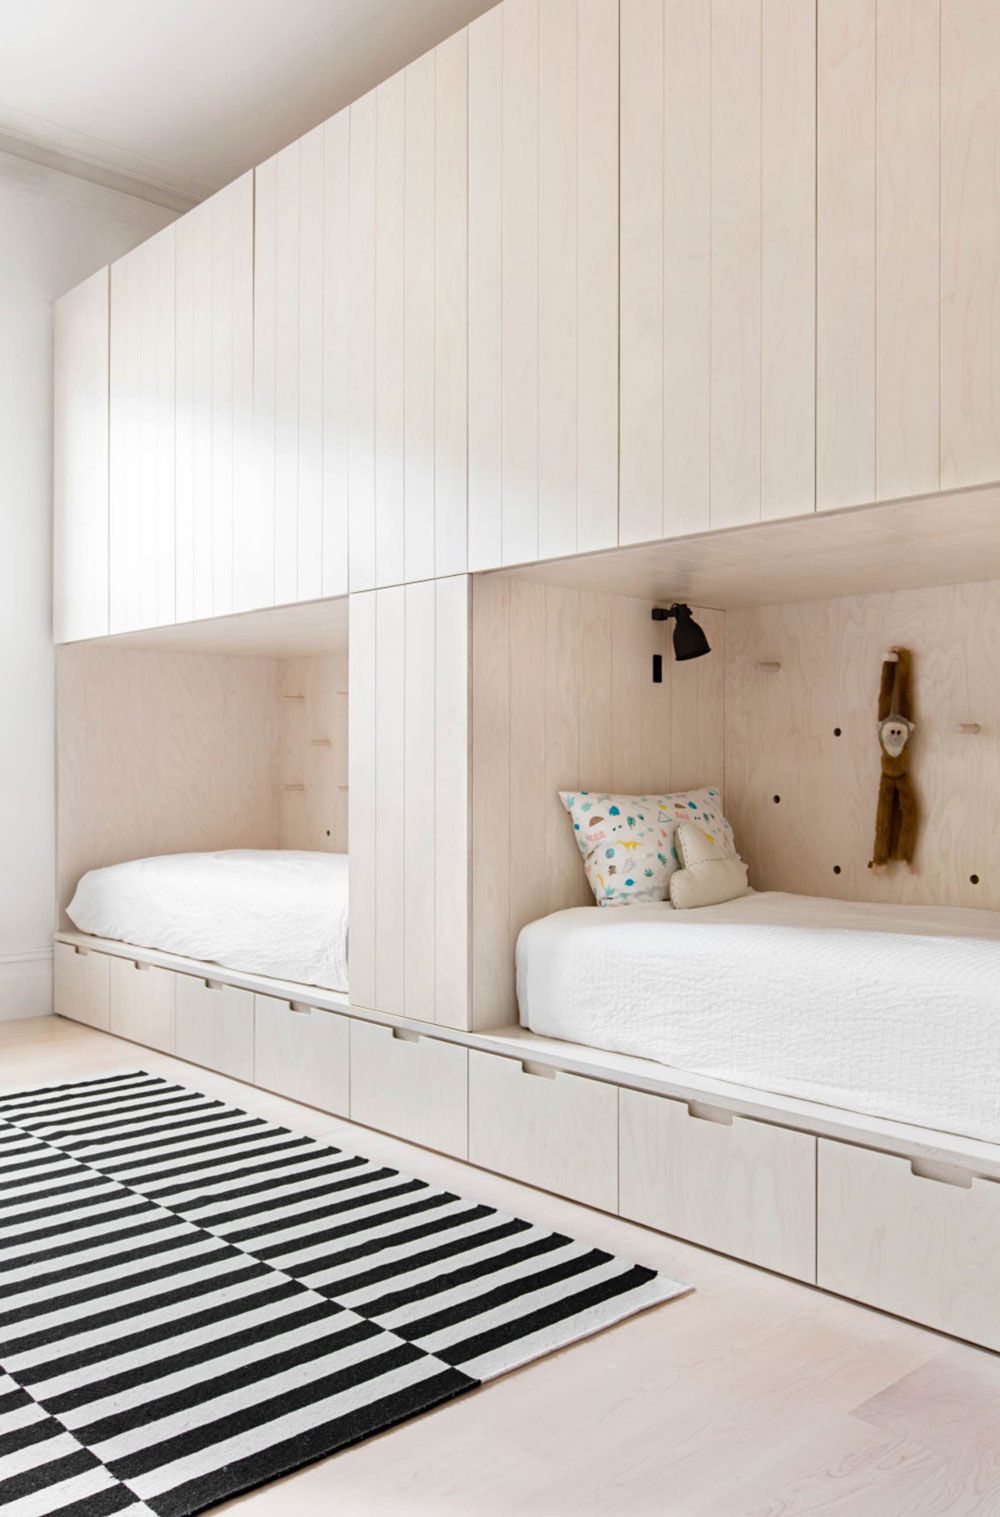 5 kids spaces with integrated beds and storage